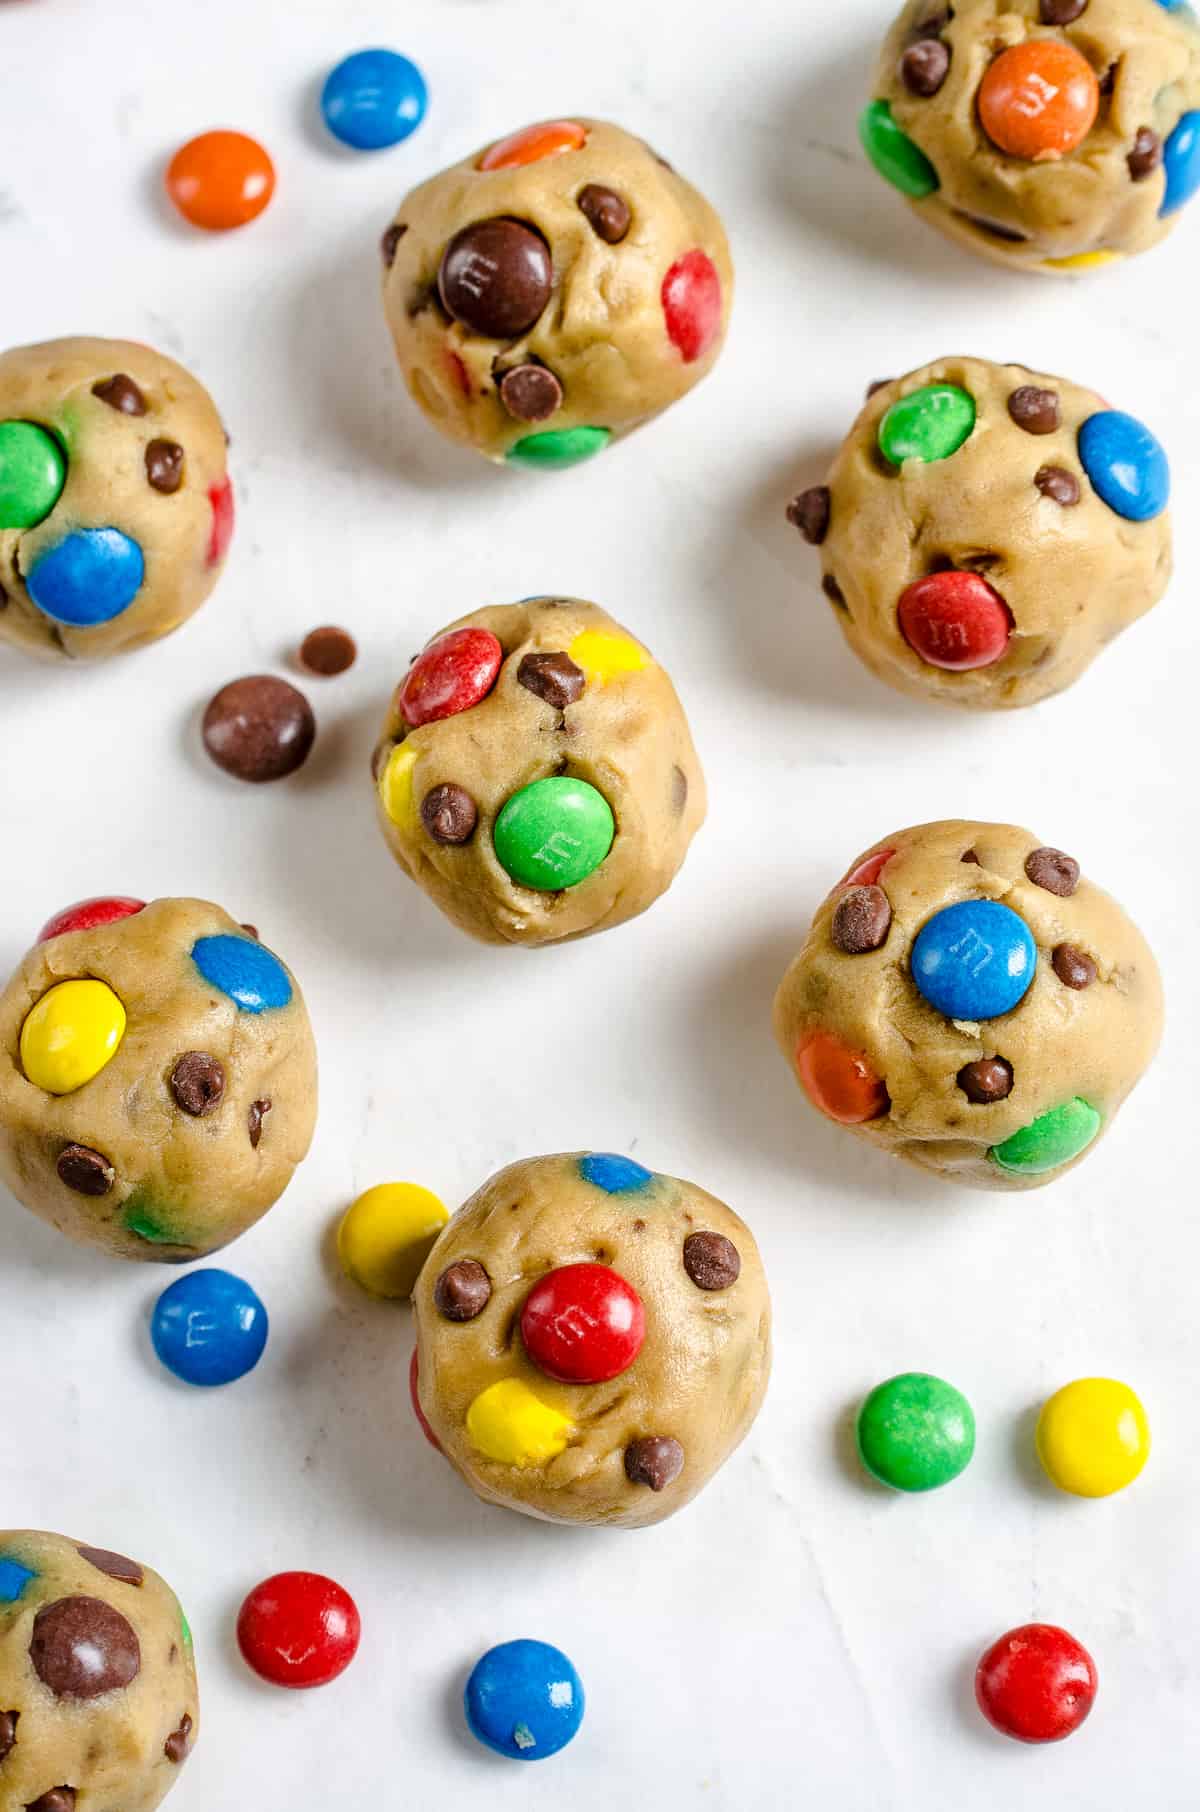 Nine balls of unbaked cookie dough on top of a plain white surface